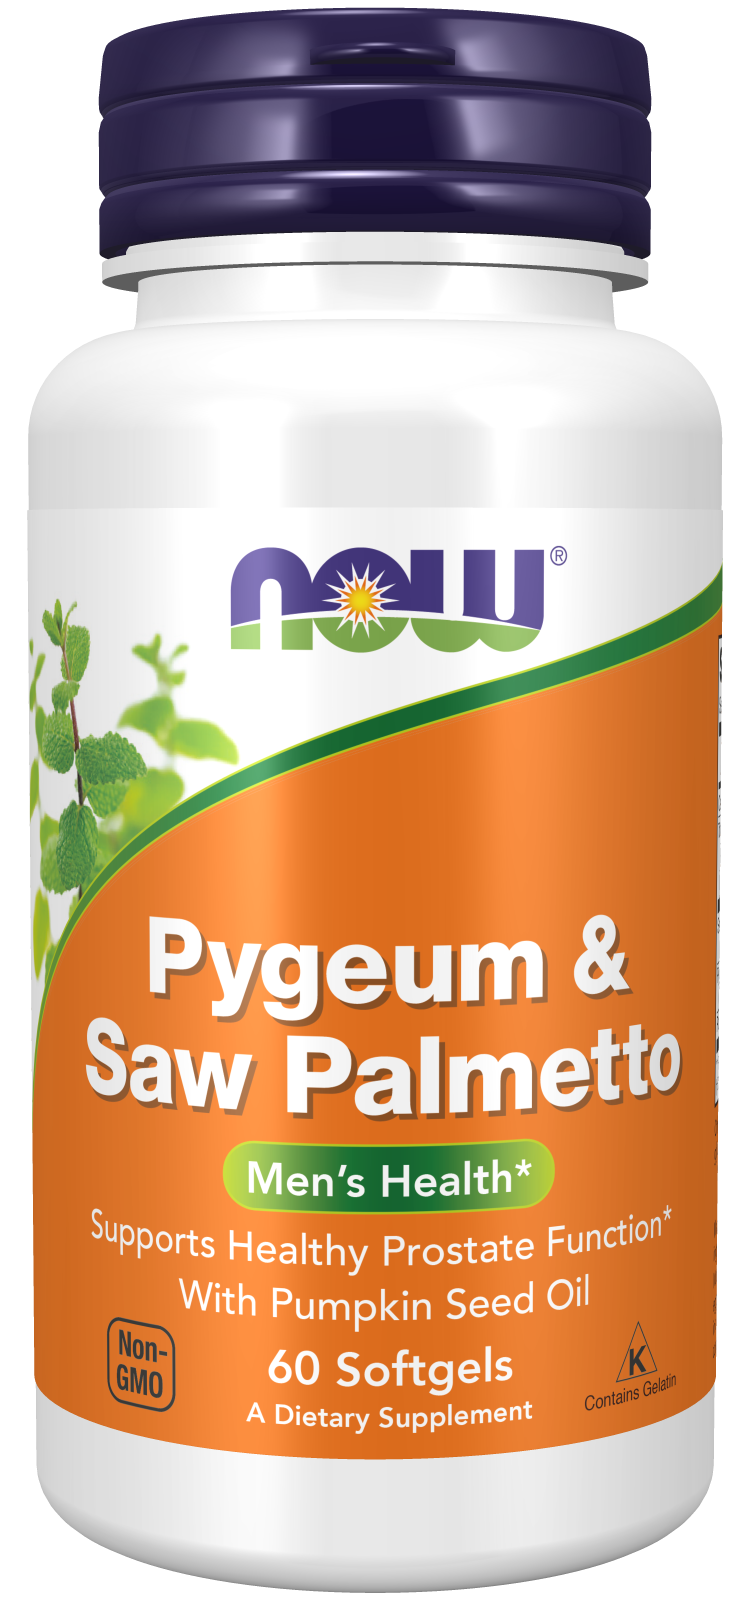 Pygeum & Saw Palmetto - 60 Softgels Bottle Front